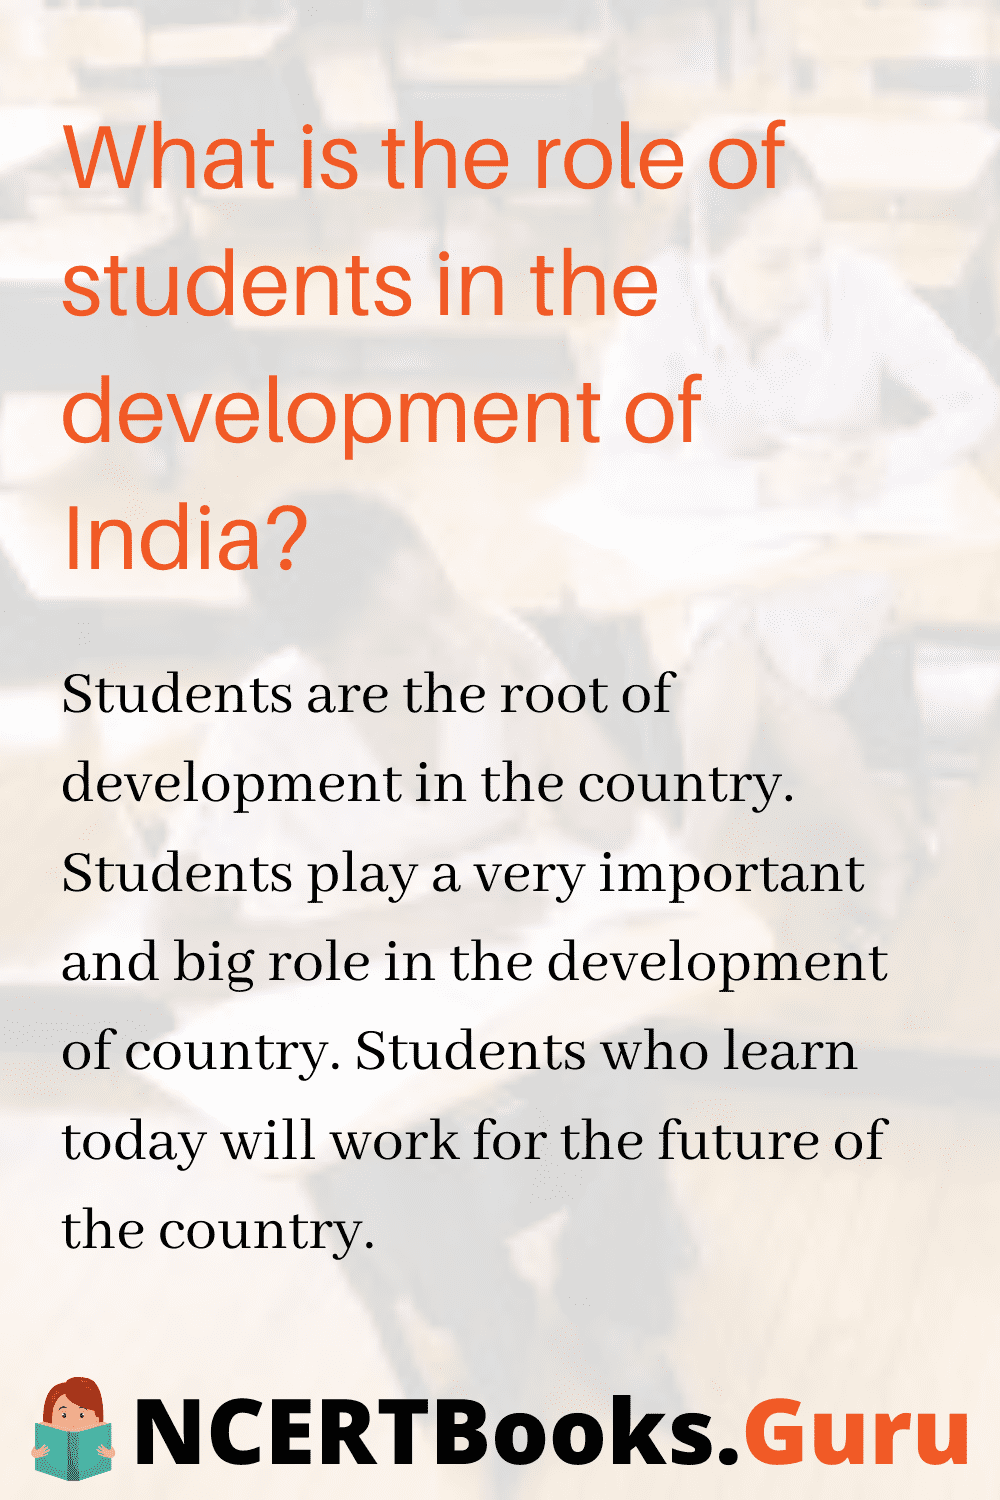 Role of students in the development of India